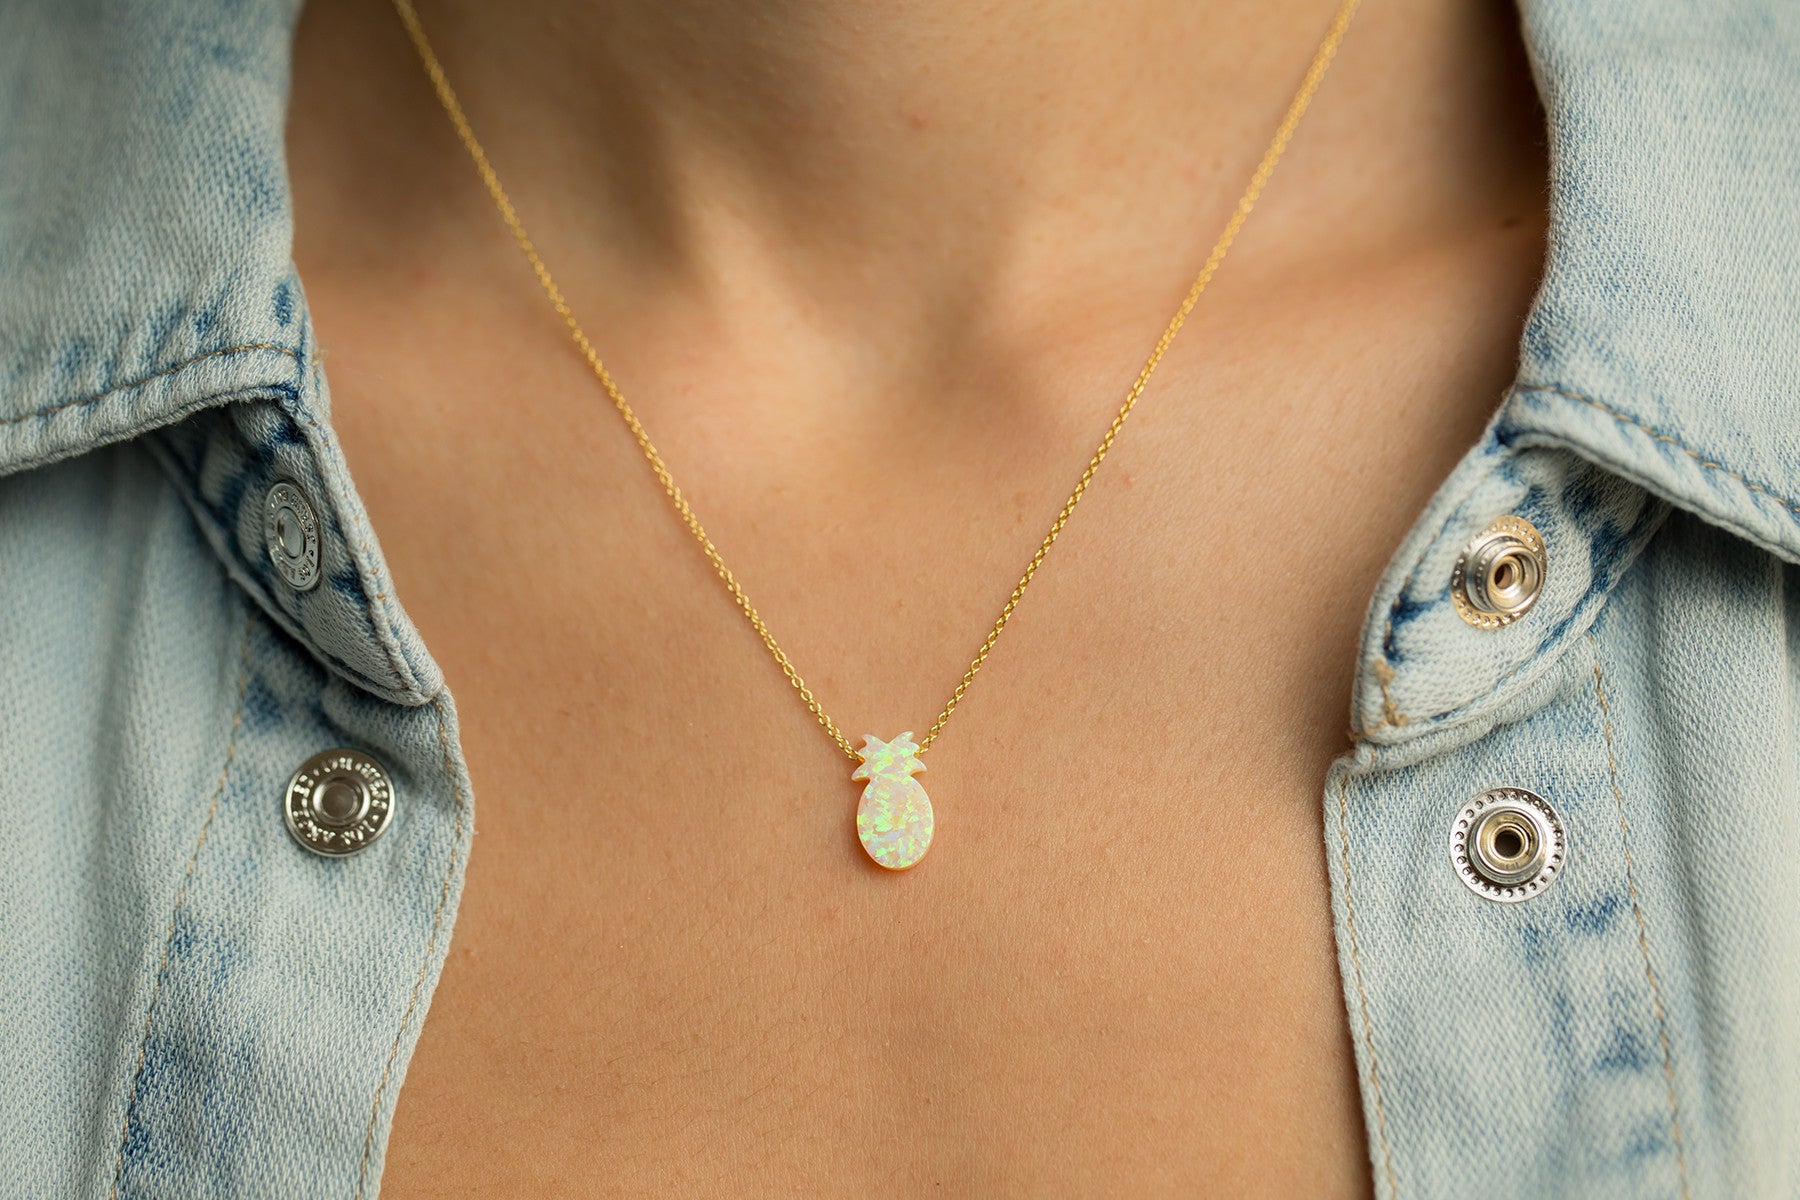 Pineapple Women's Necklace with Yellow Opal Pendant Sterling Silver Chain